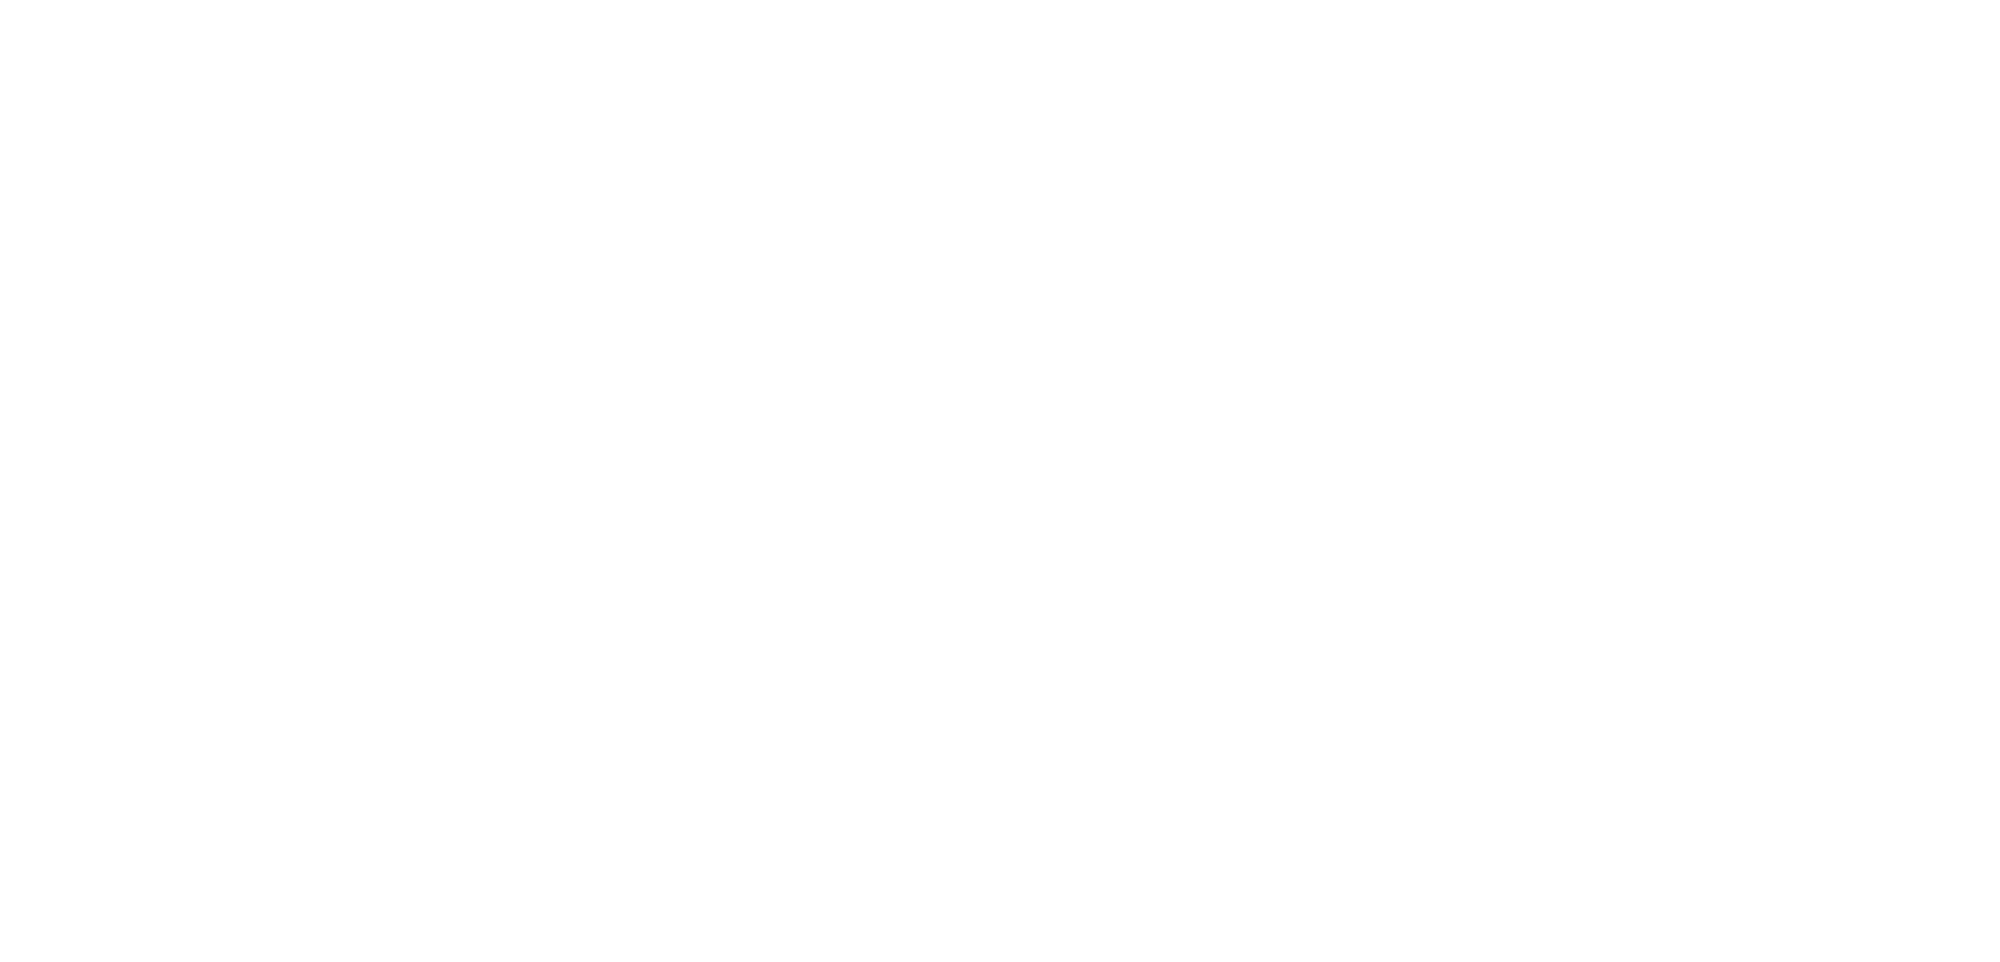 DittyPop Catering